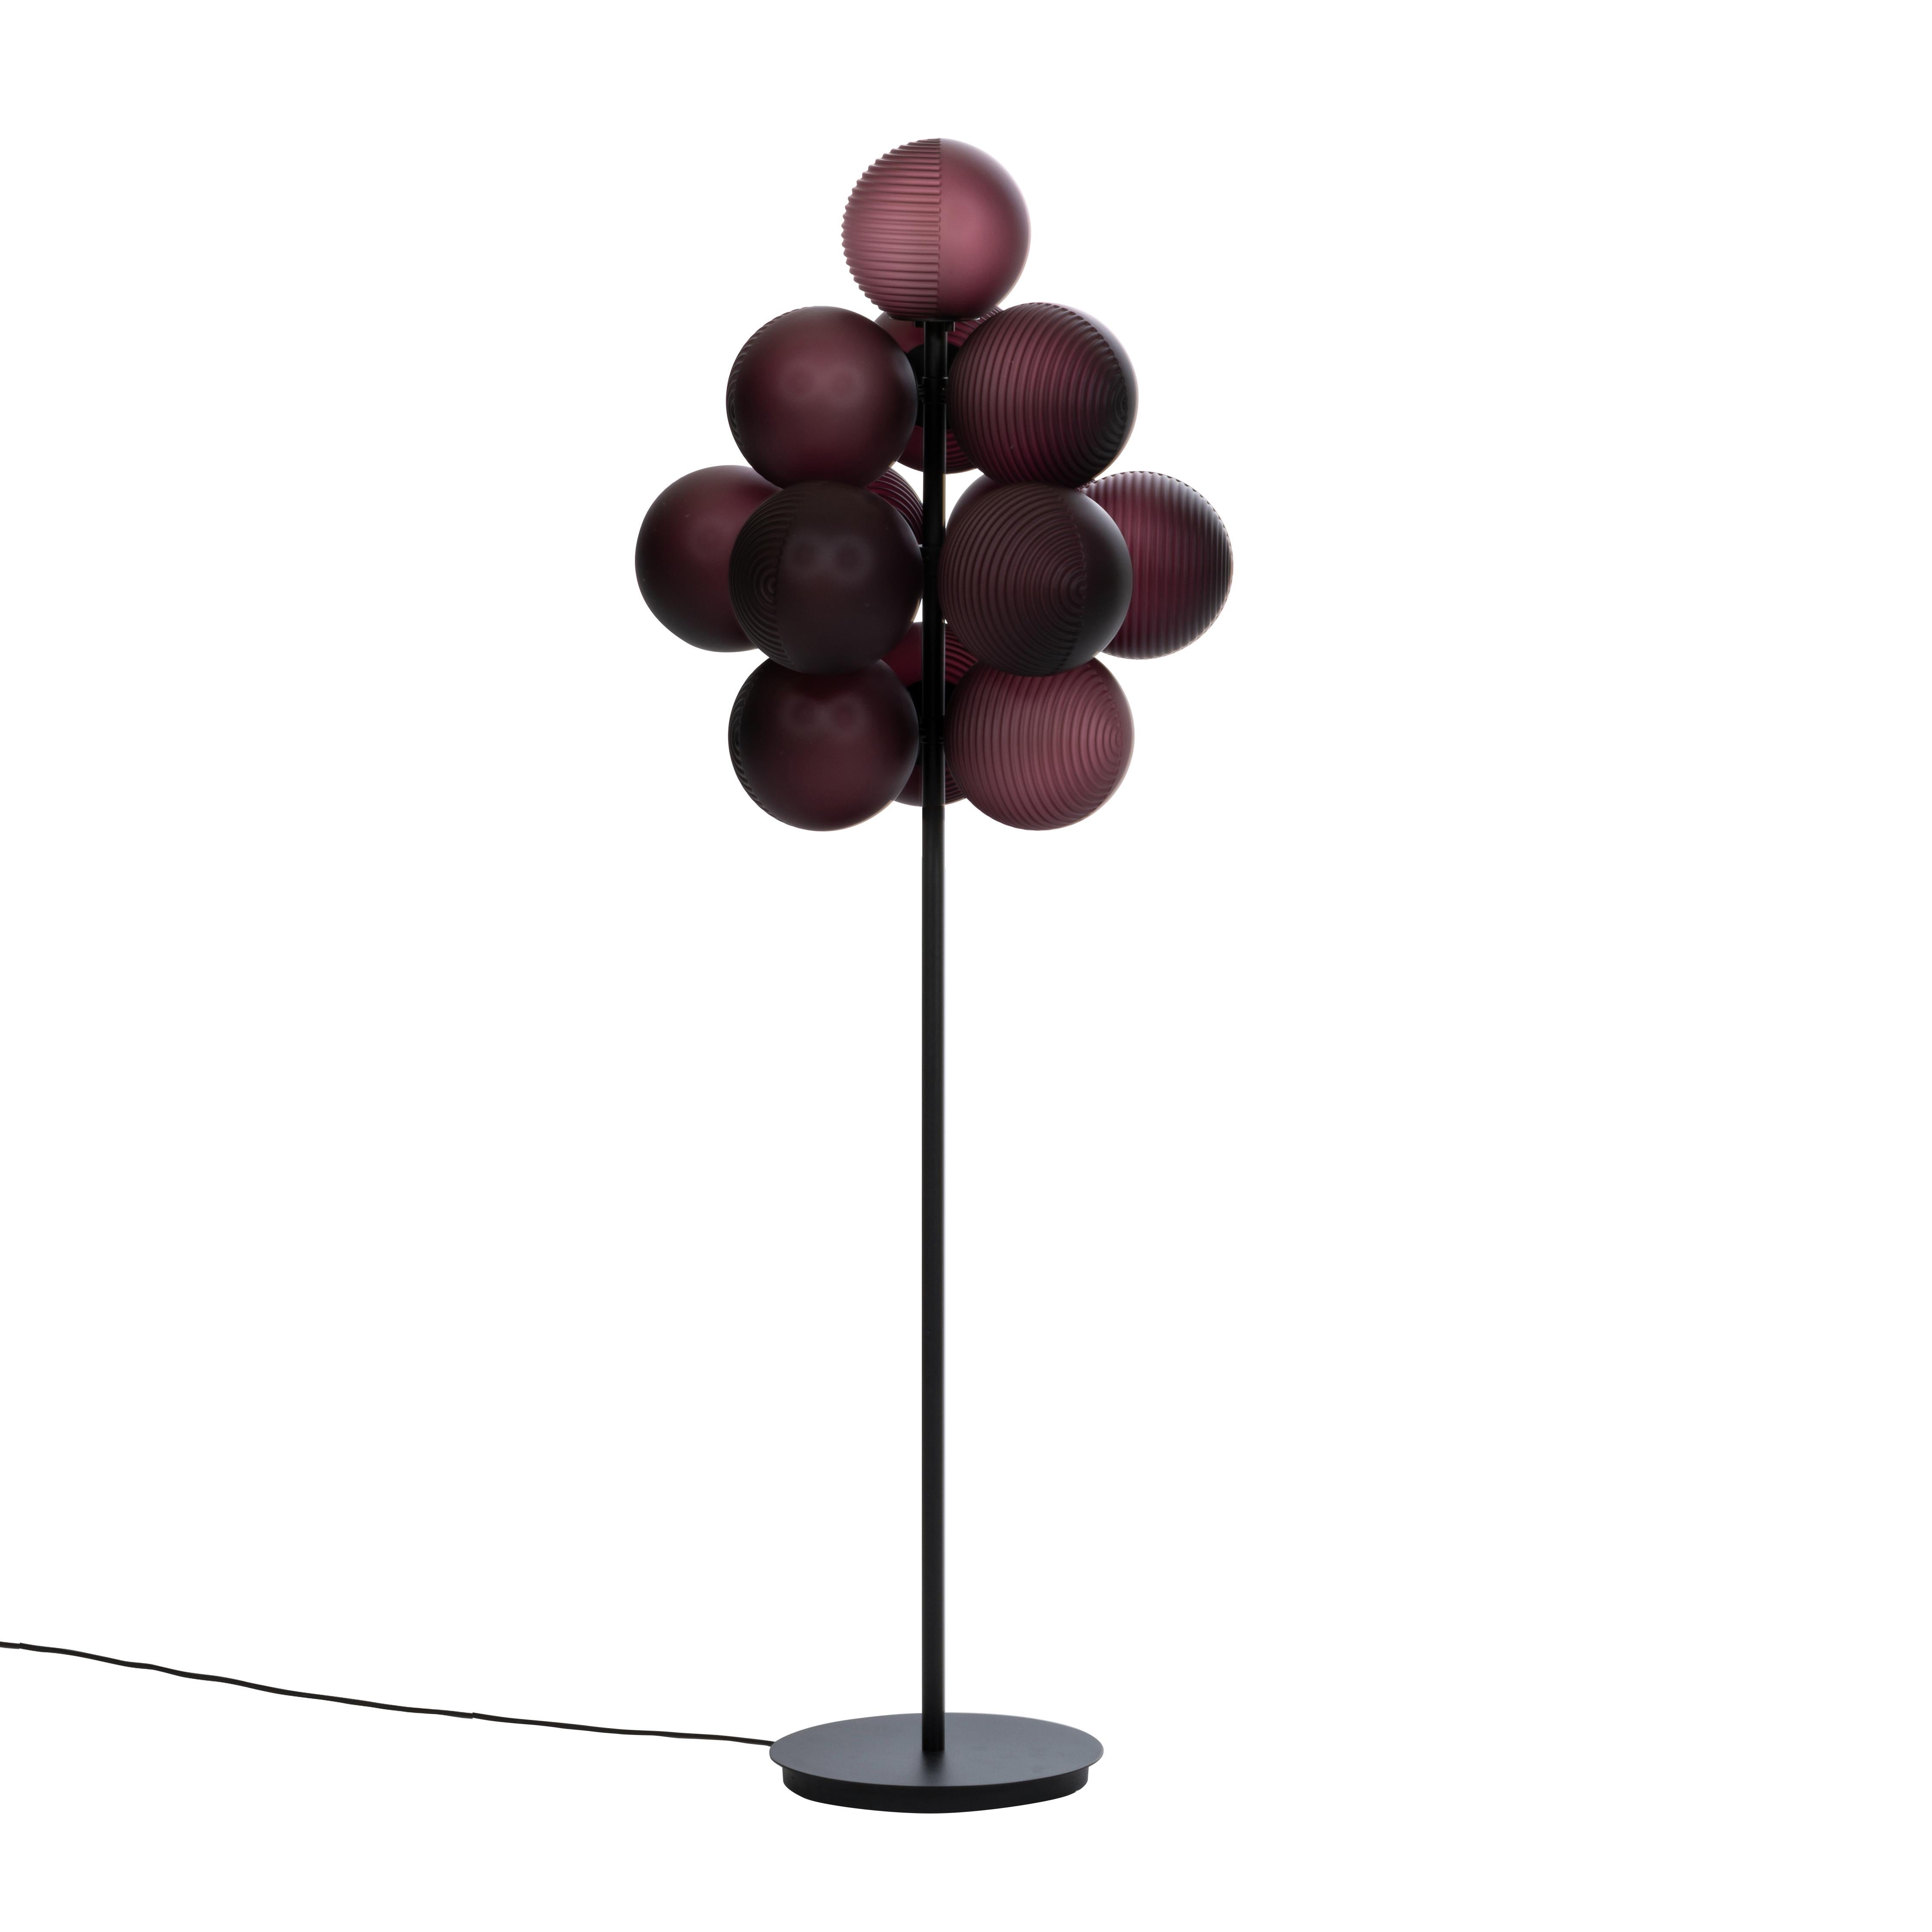 Stellar grape big aubergine acetato black floor light by Pulpo.
Dimensions: D61 x H158 cm.
Materials: hand blown glass coloured, powder coated steel.

Also available in different finishes. Height can be customised. 

Raised up above the clouds